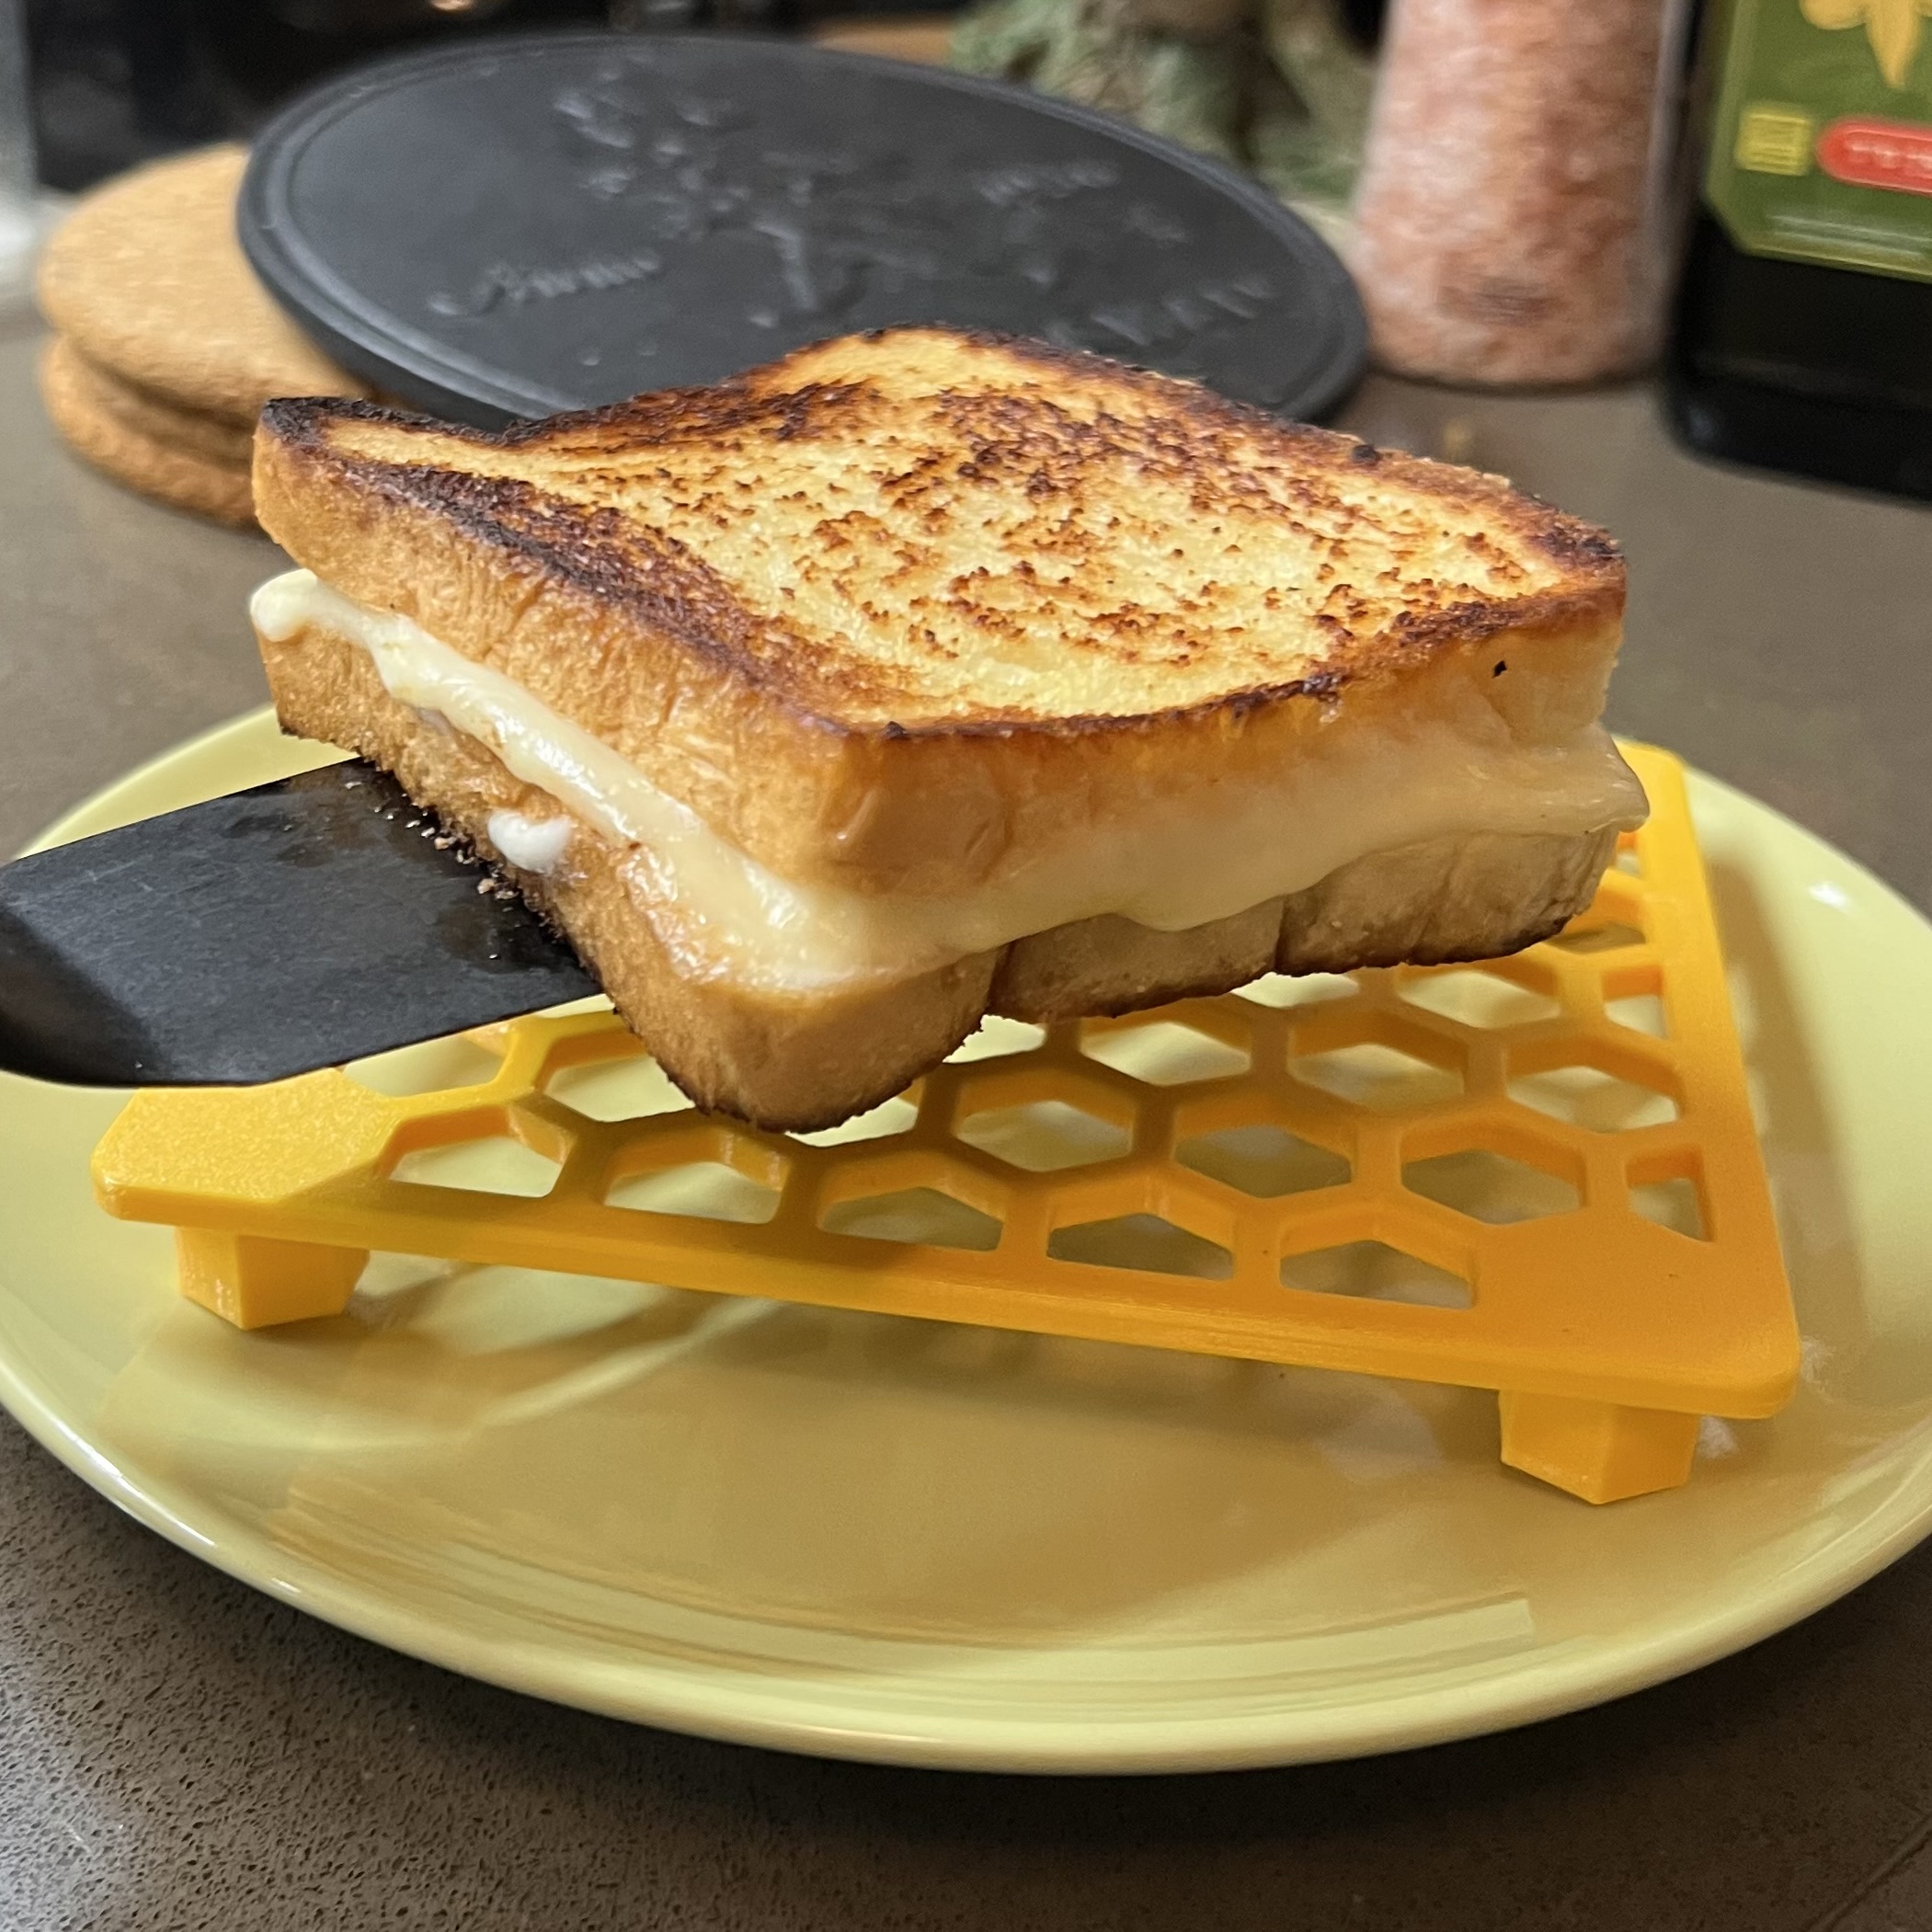 The 'Keeping it Crispy' tray holder for Grilled Cheese Sandwich & Toast!